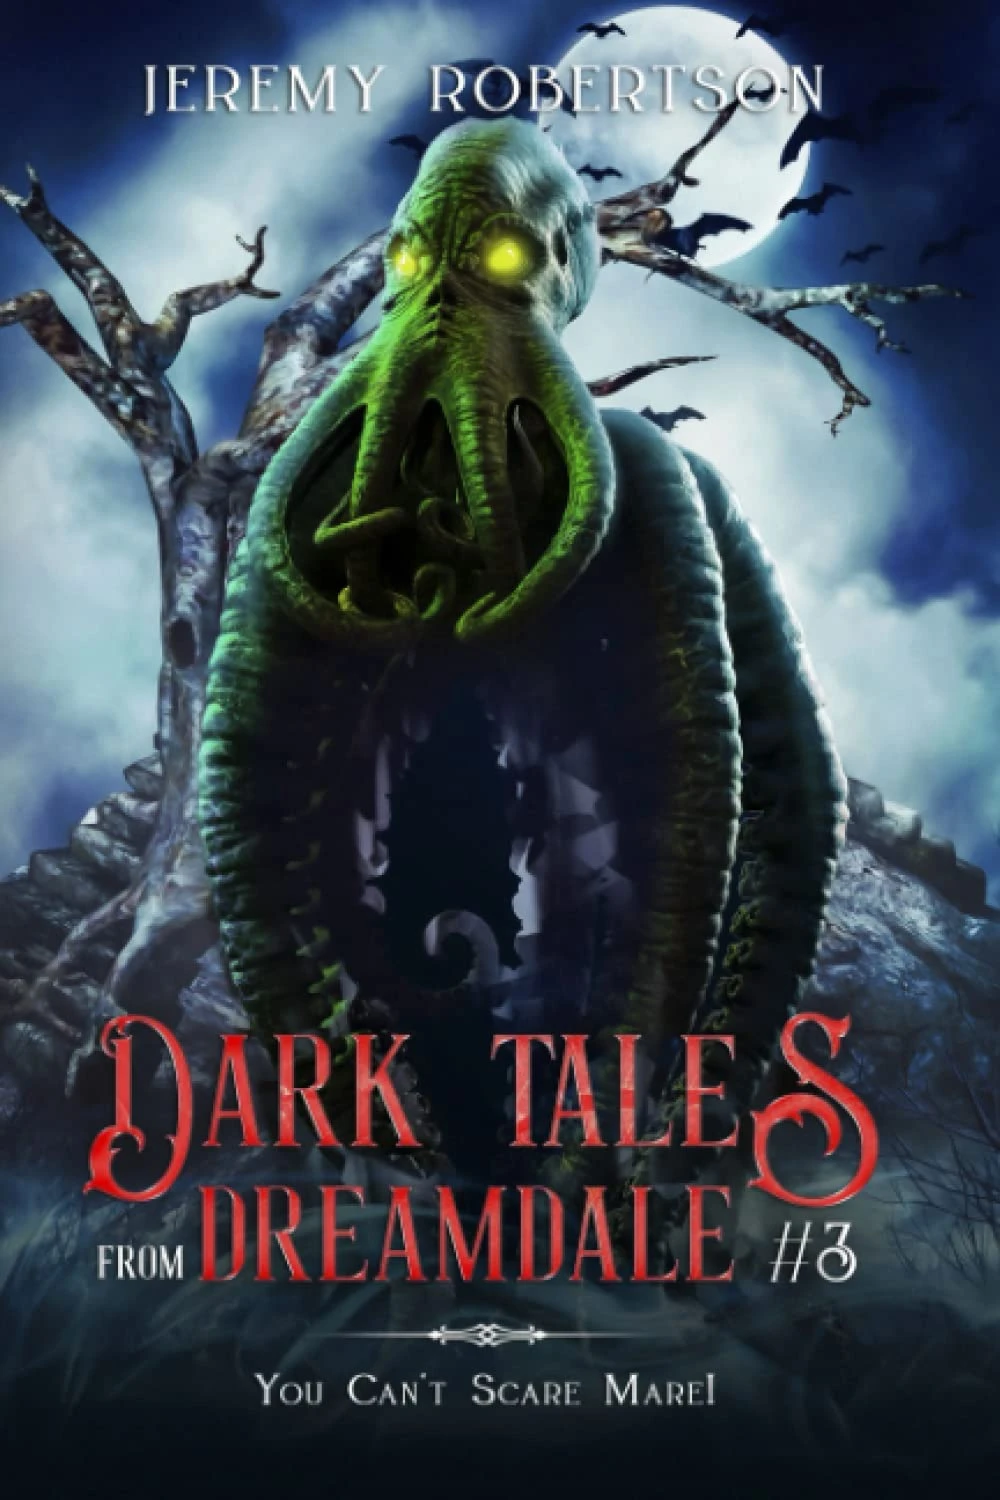 Dark Tales from Dreamdale #3. You Can’t Scare Mare!